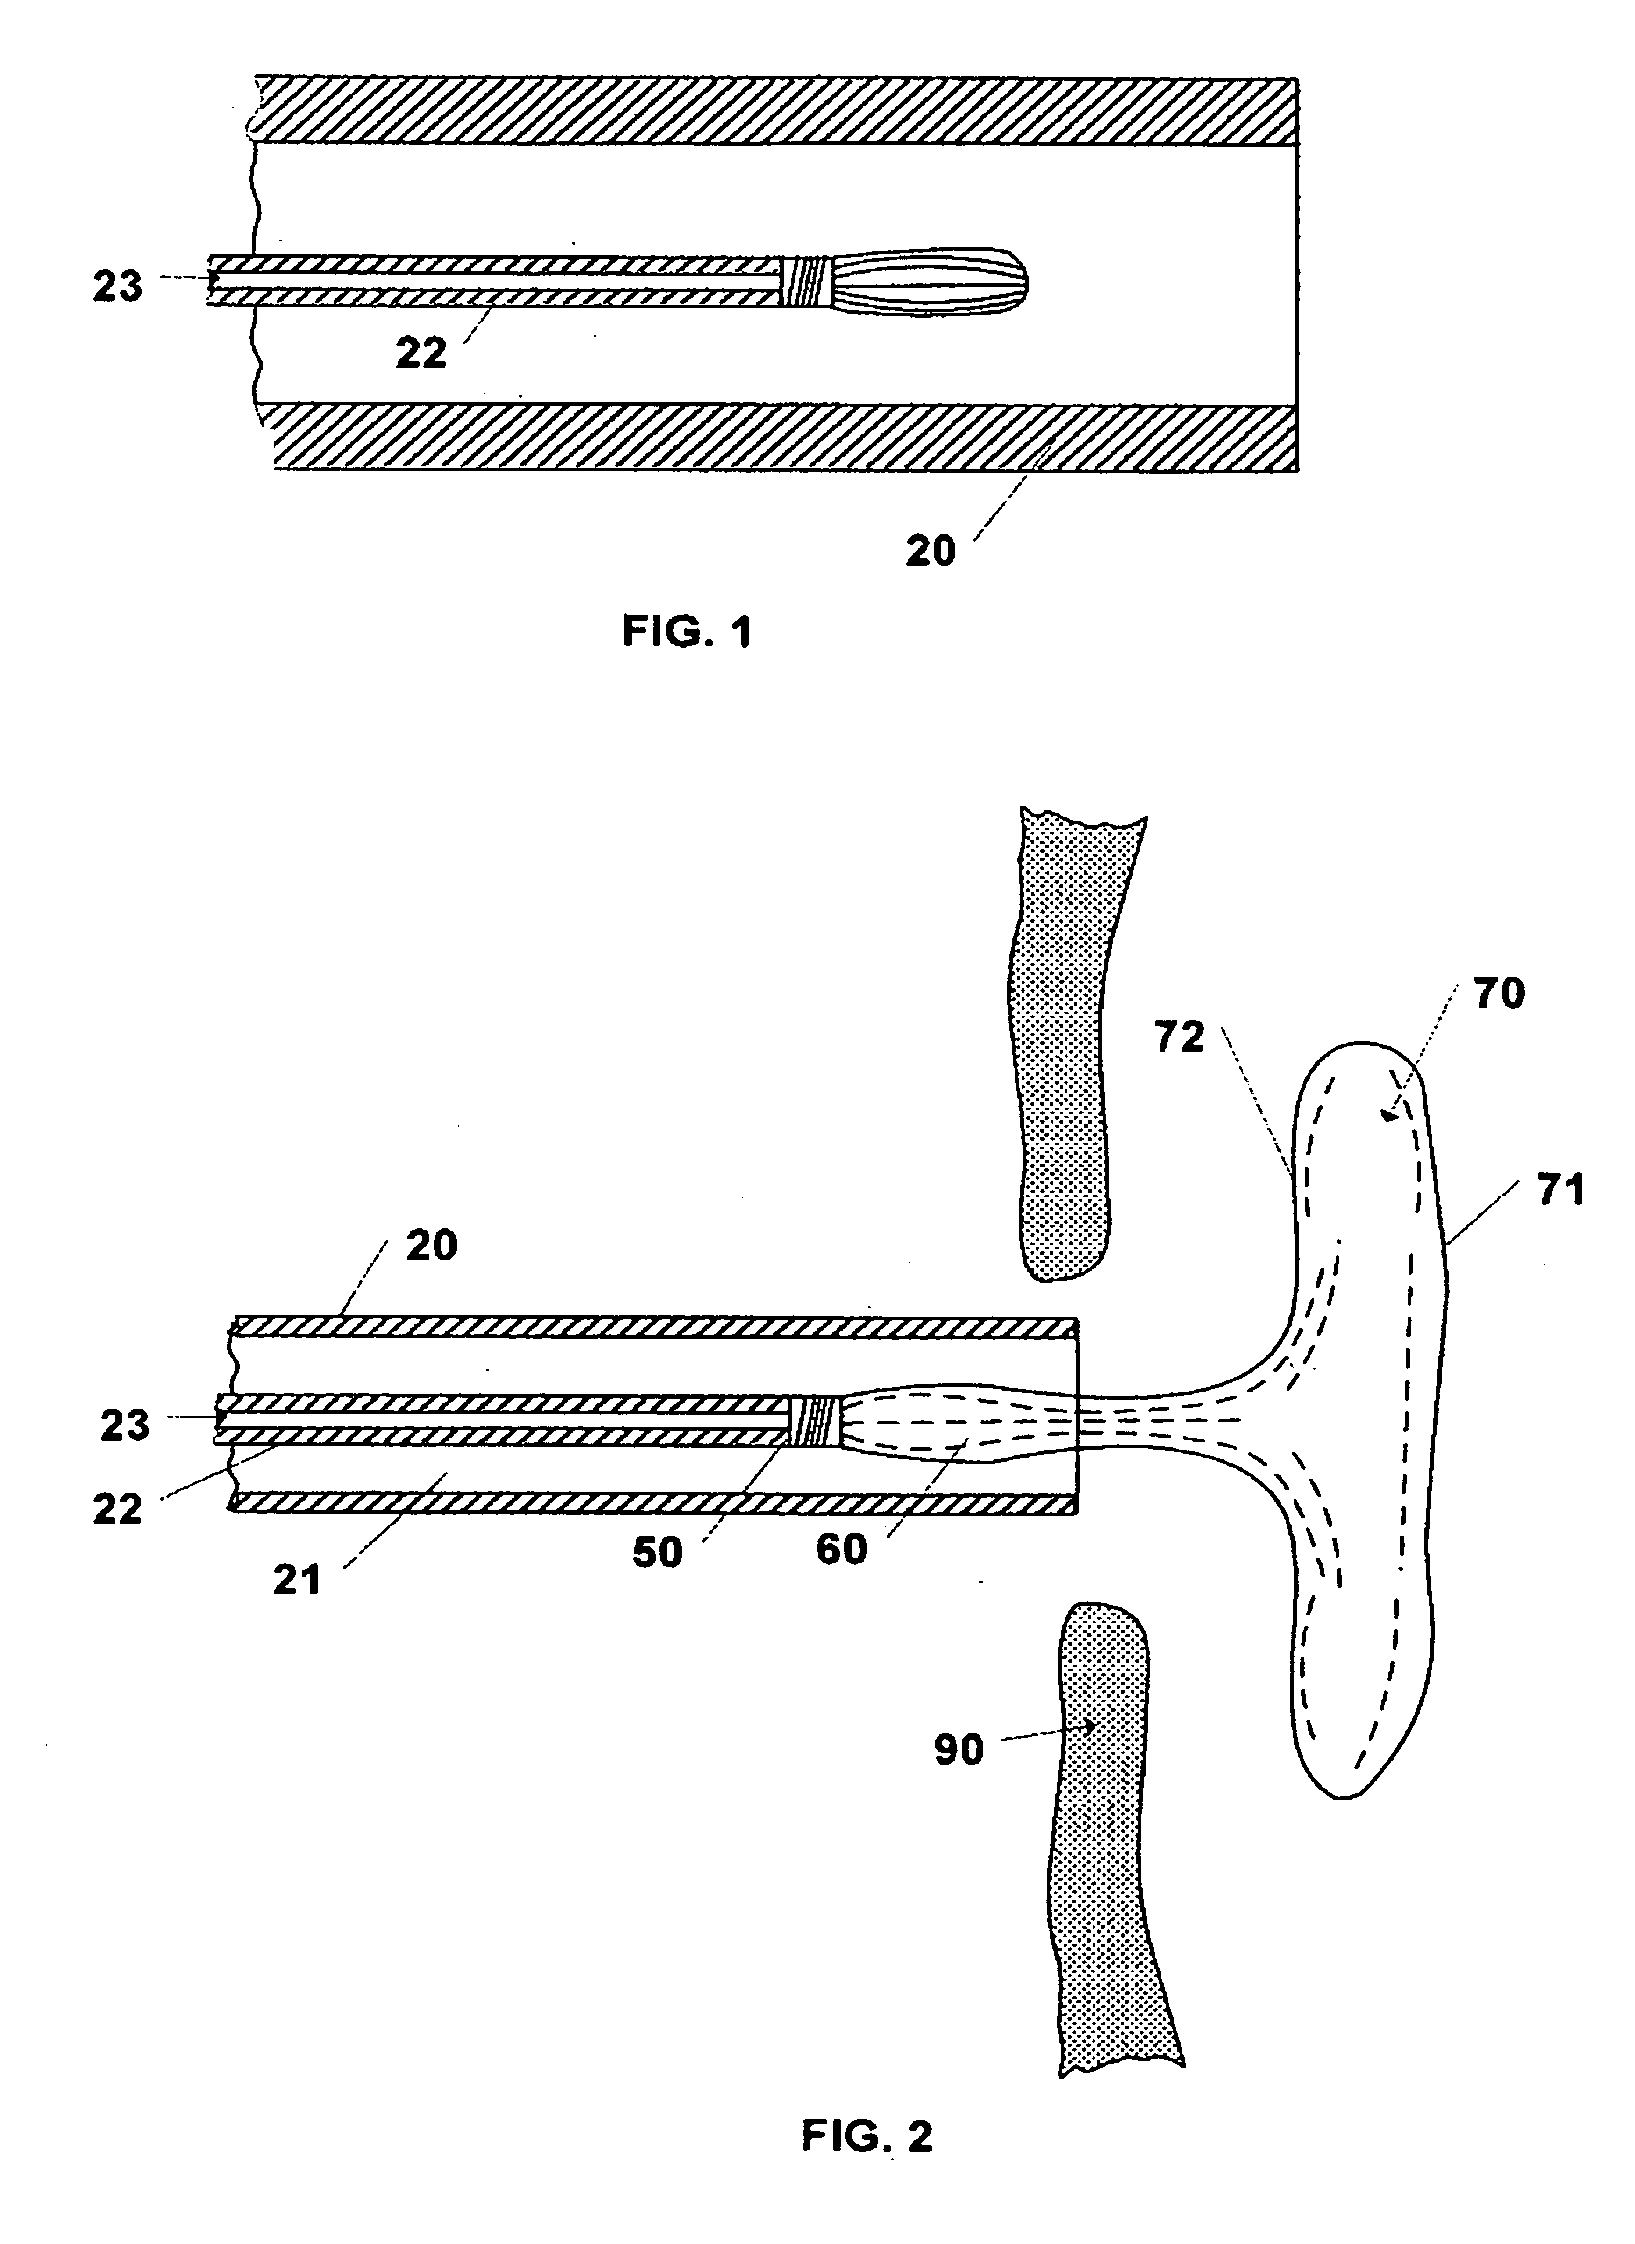 Device and Method for Closure of Atrial Septal Defects